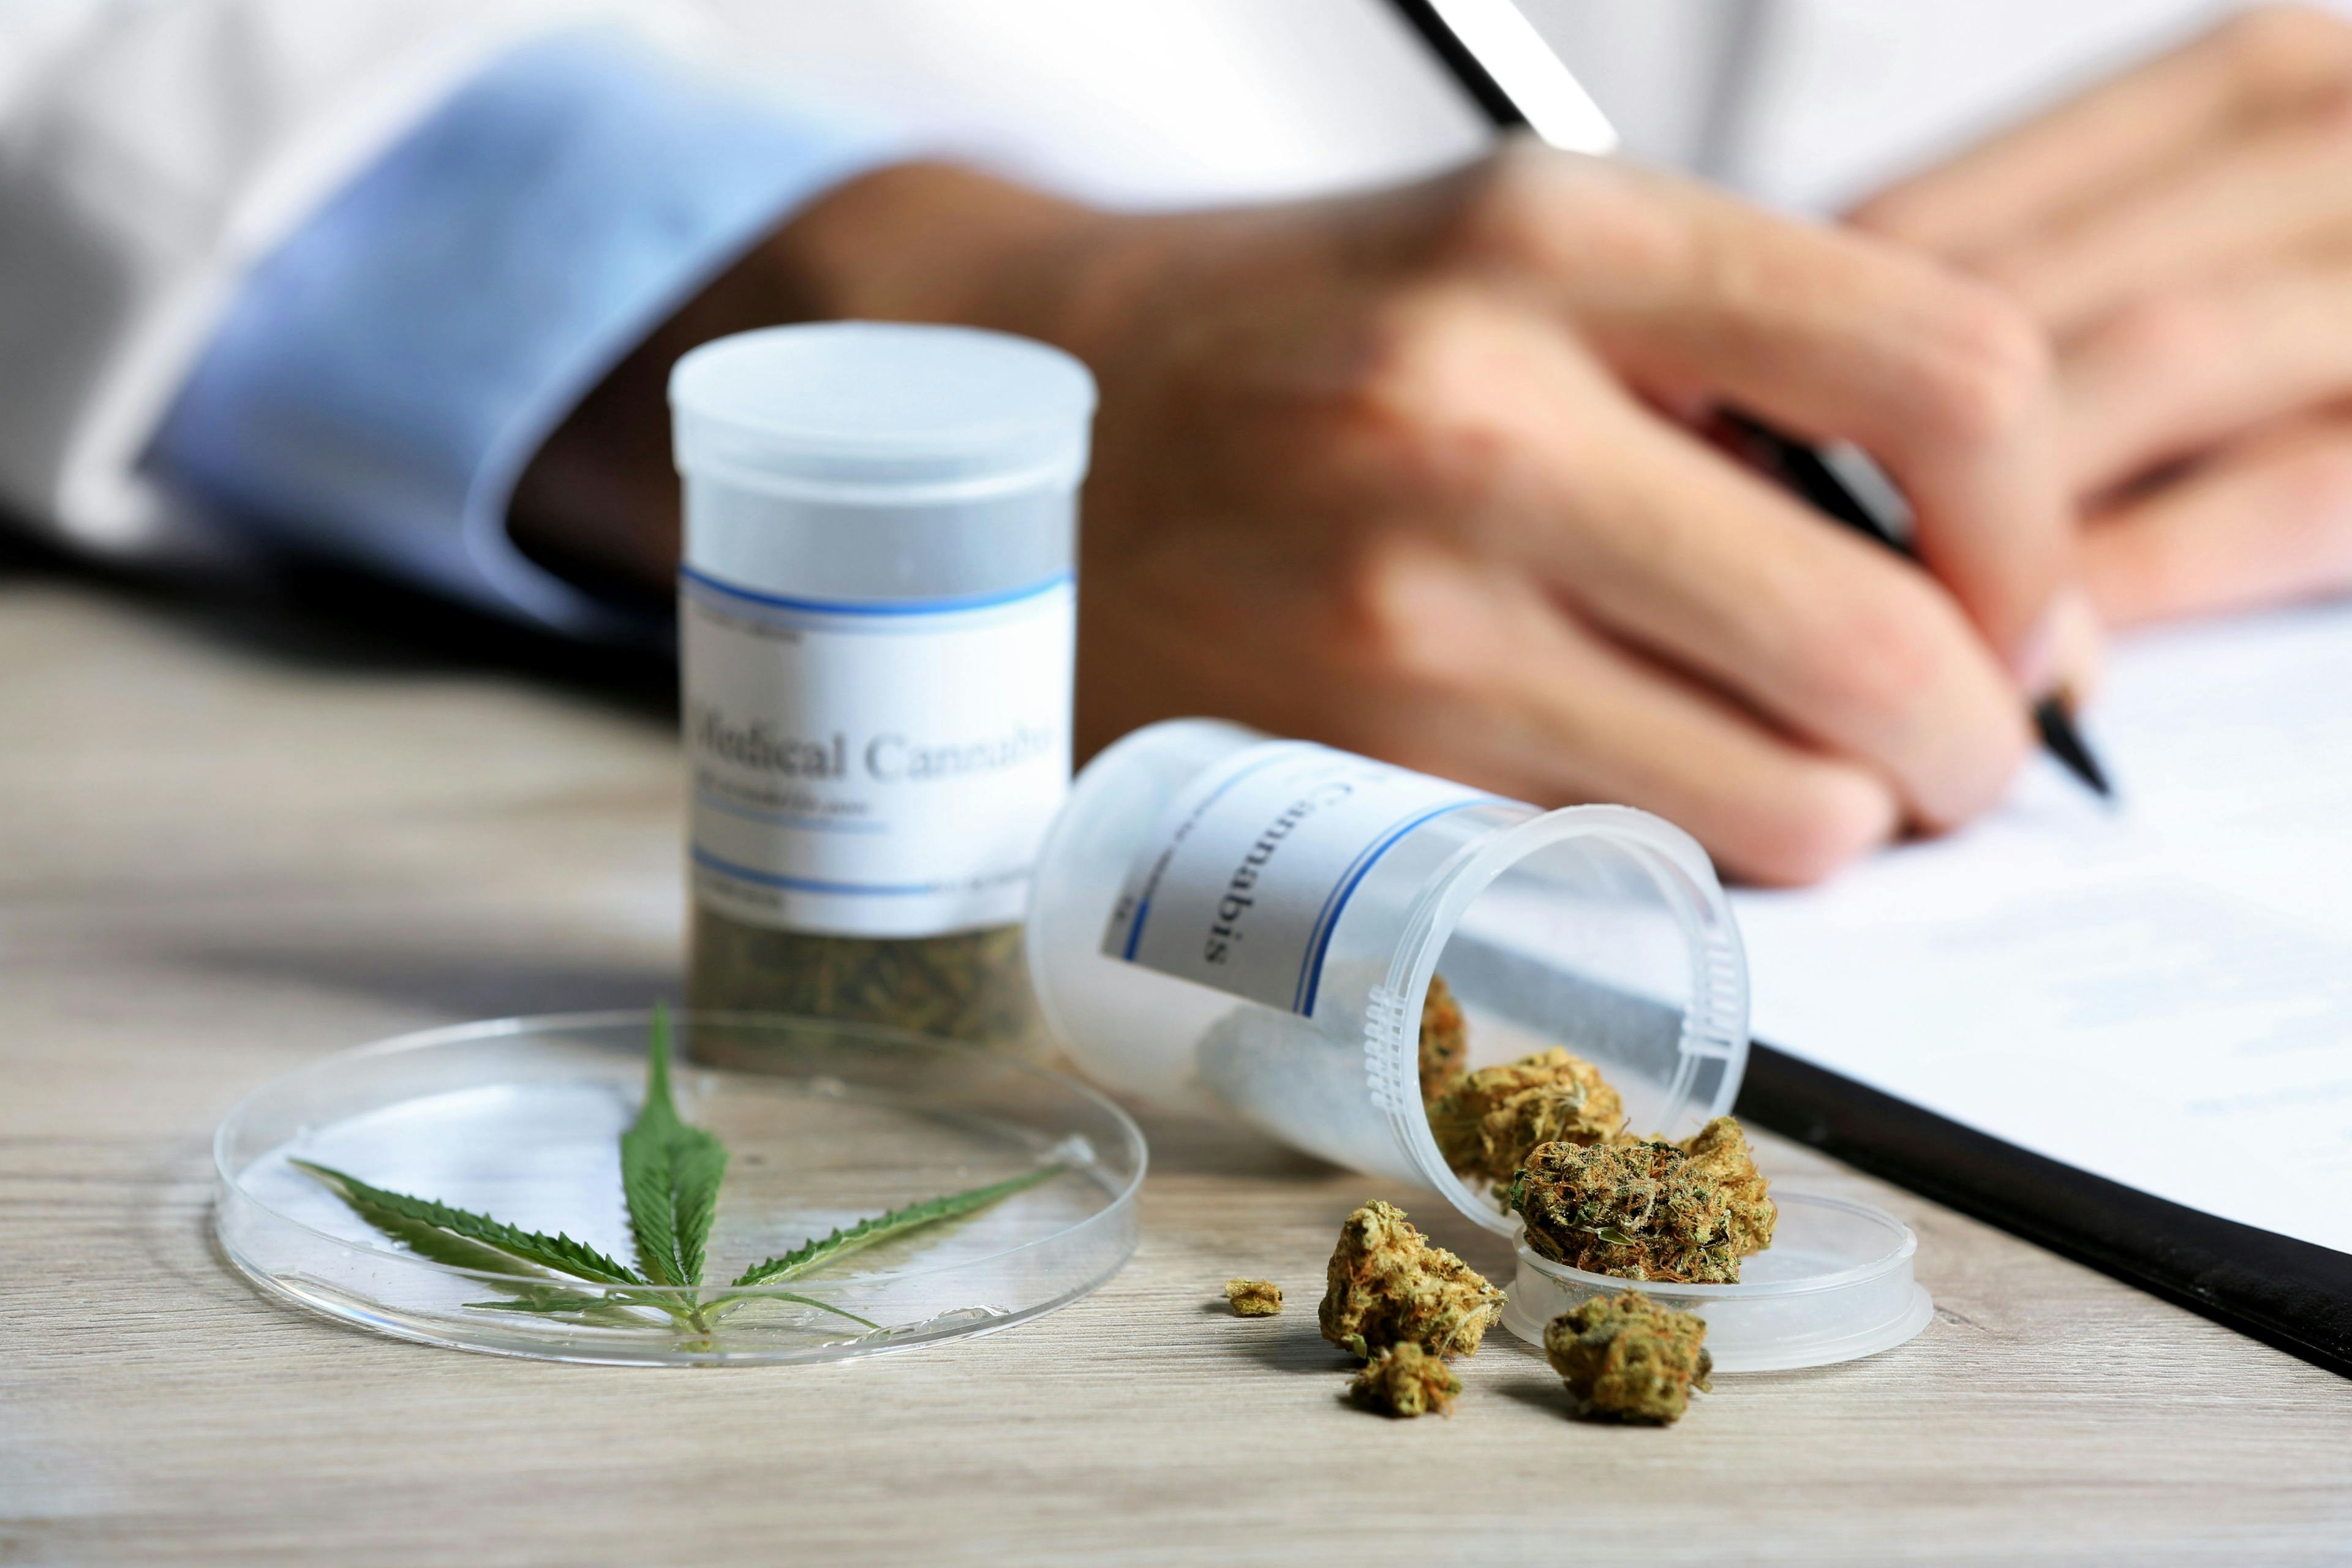 Cannabis Use Can Exacerbate Cognitive Declines in Patients With Multiple Sclerosis